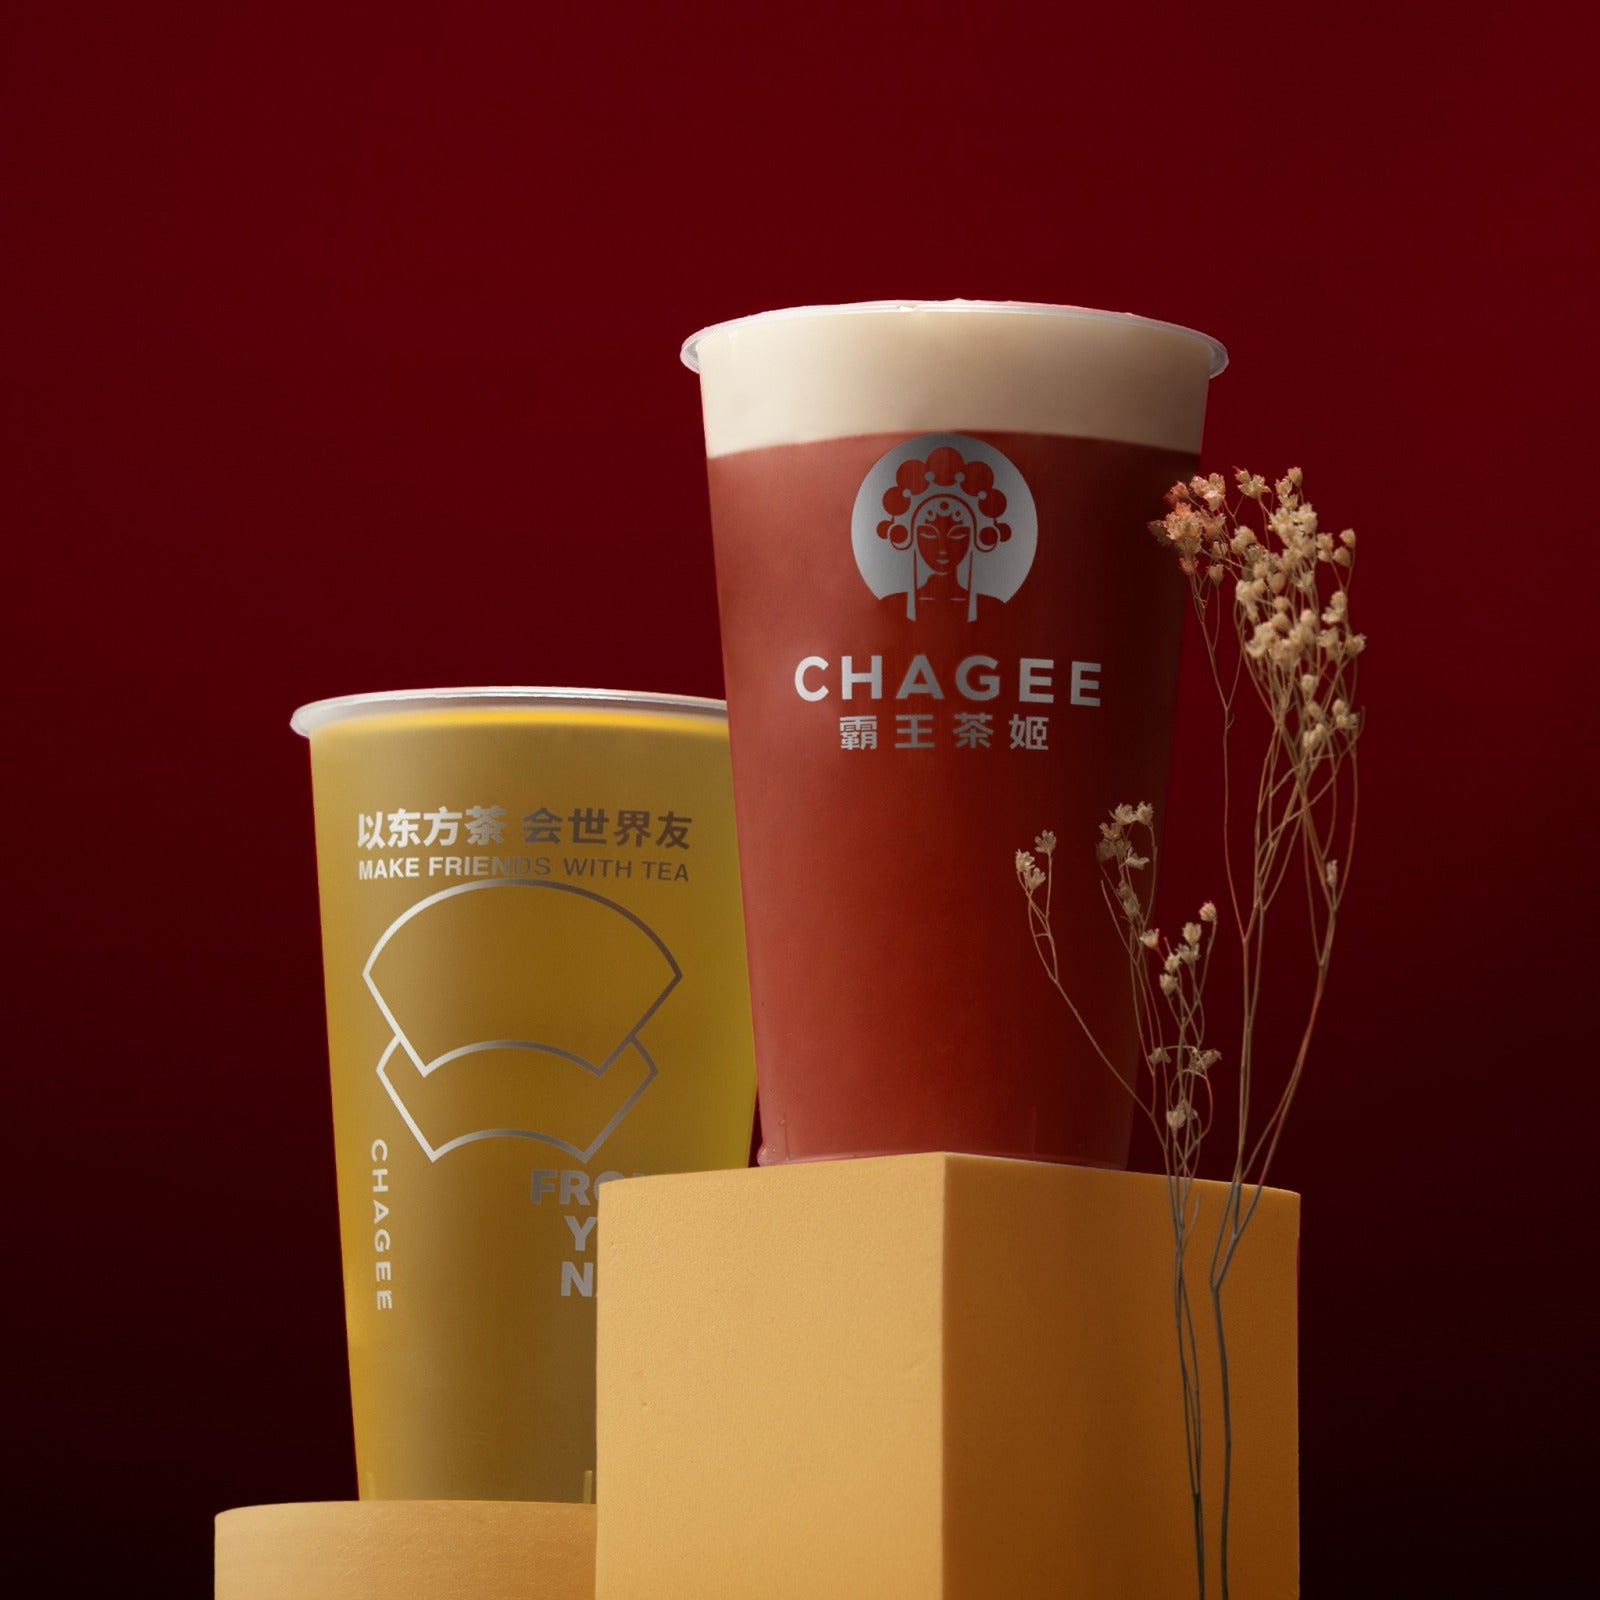 chagee rebrand packaging